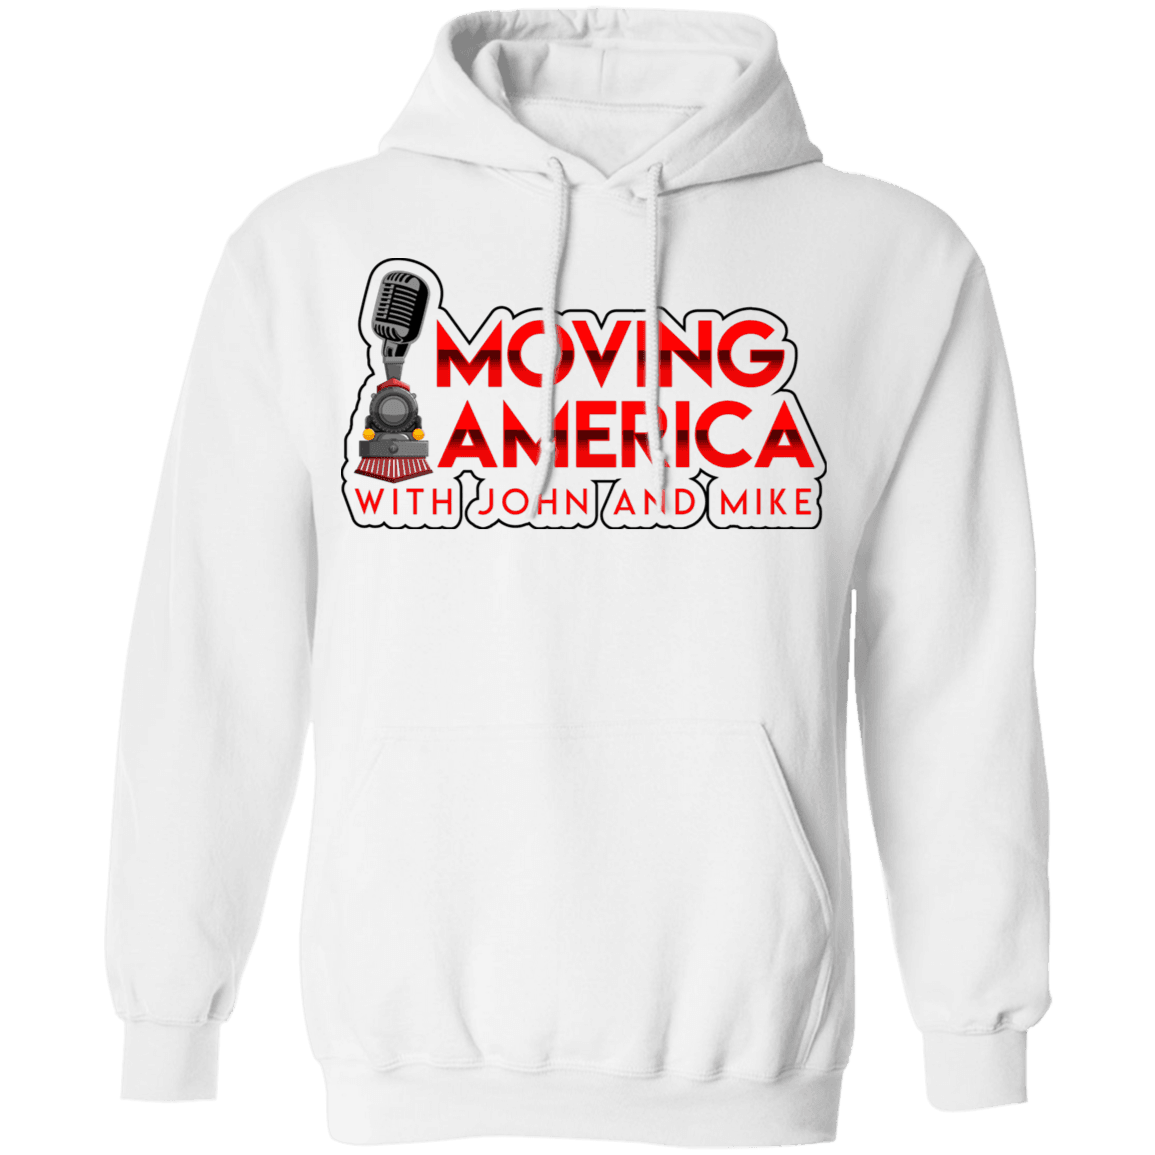 Moving America Podcast Pullover Hoodie - Broken Knuckle Apparel